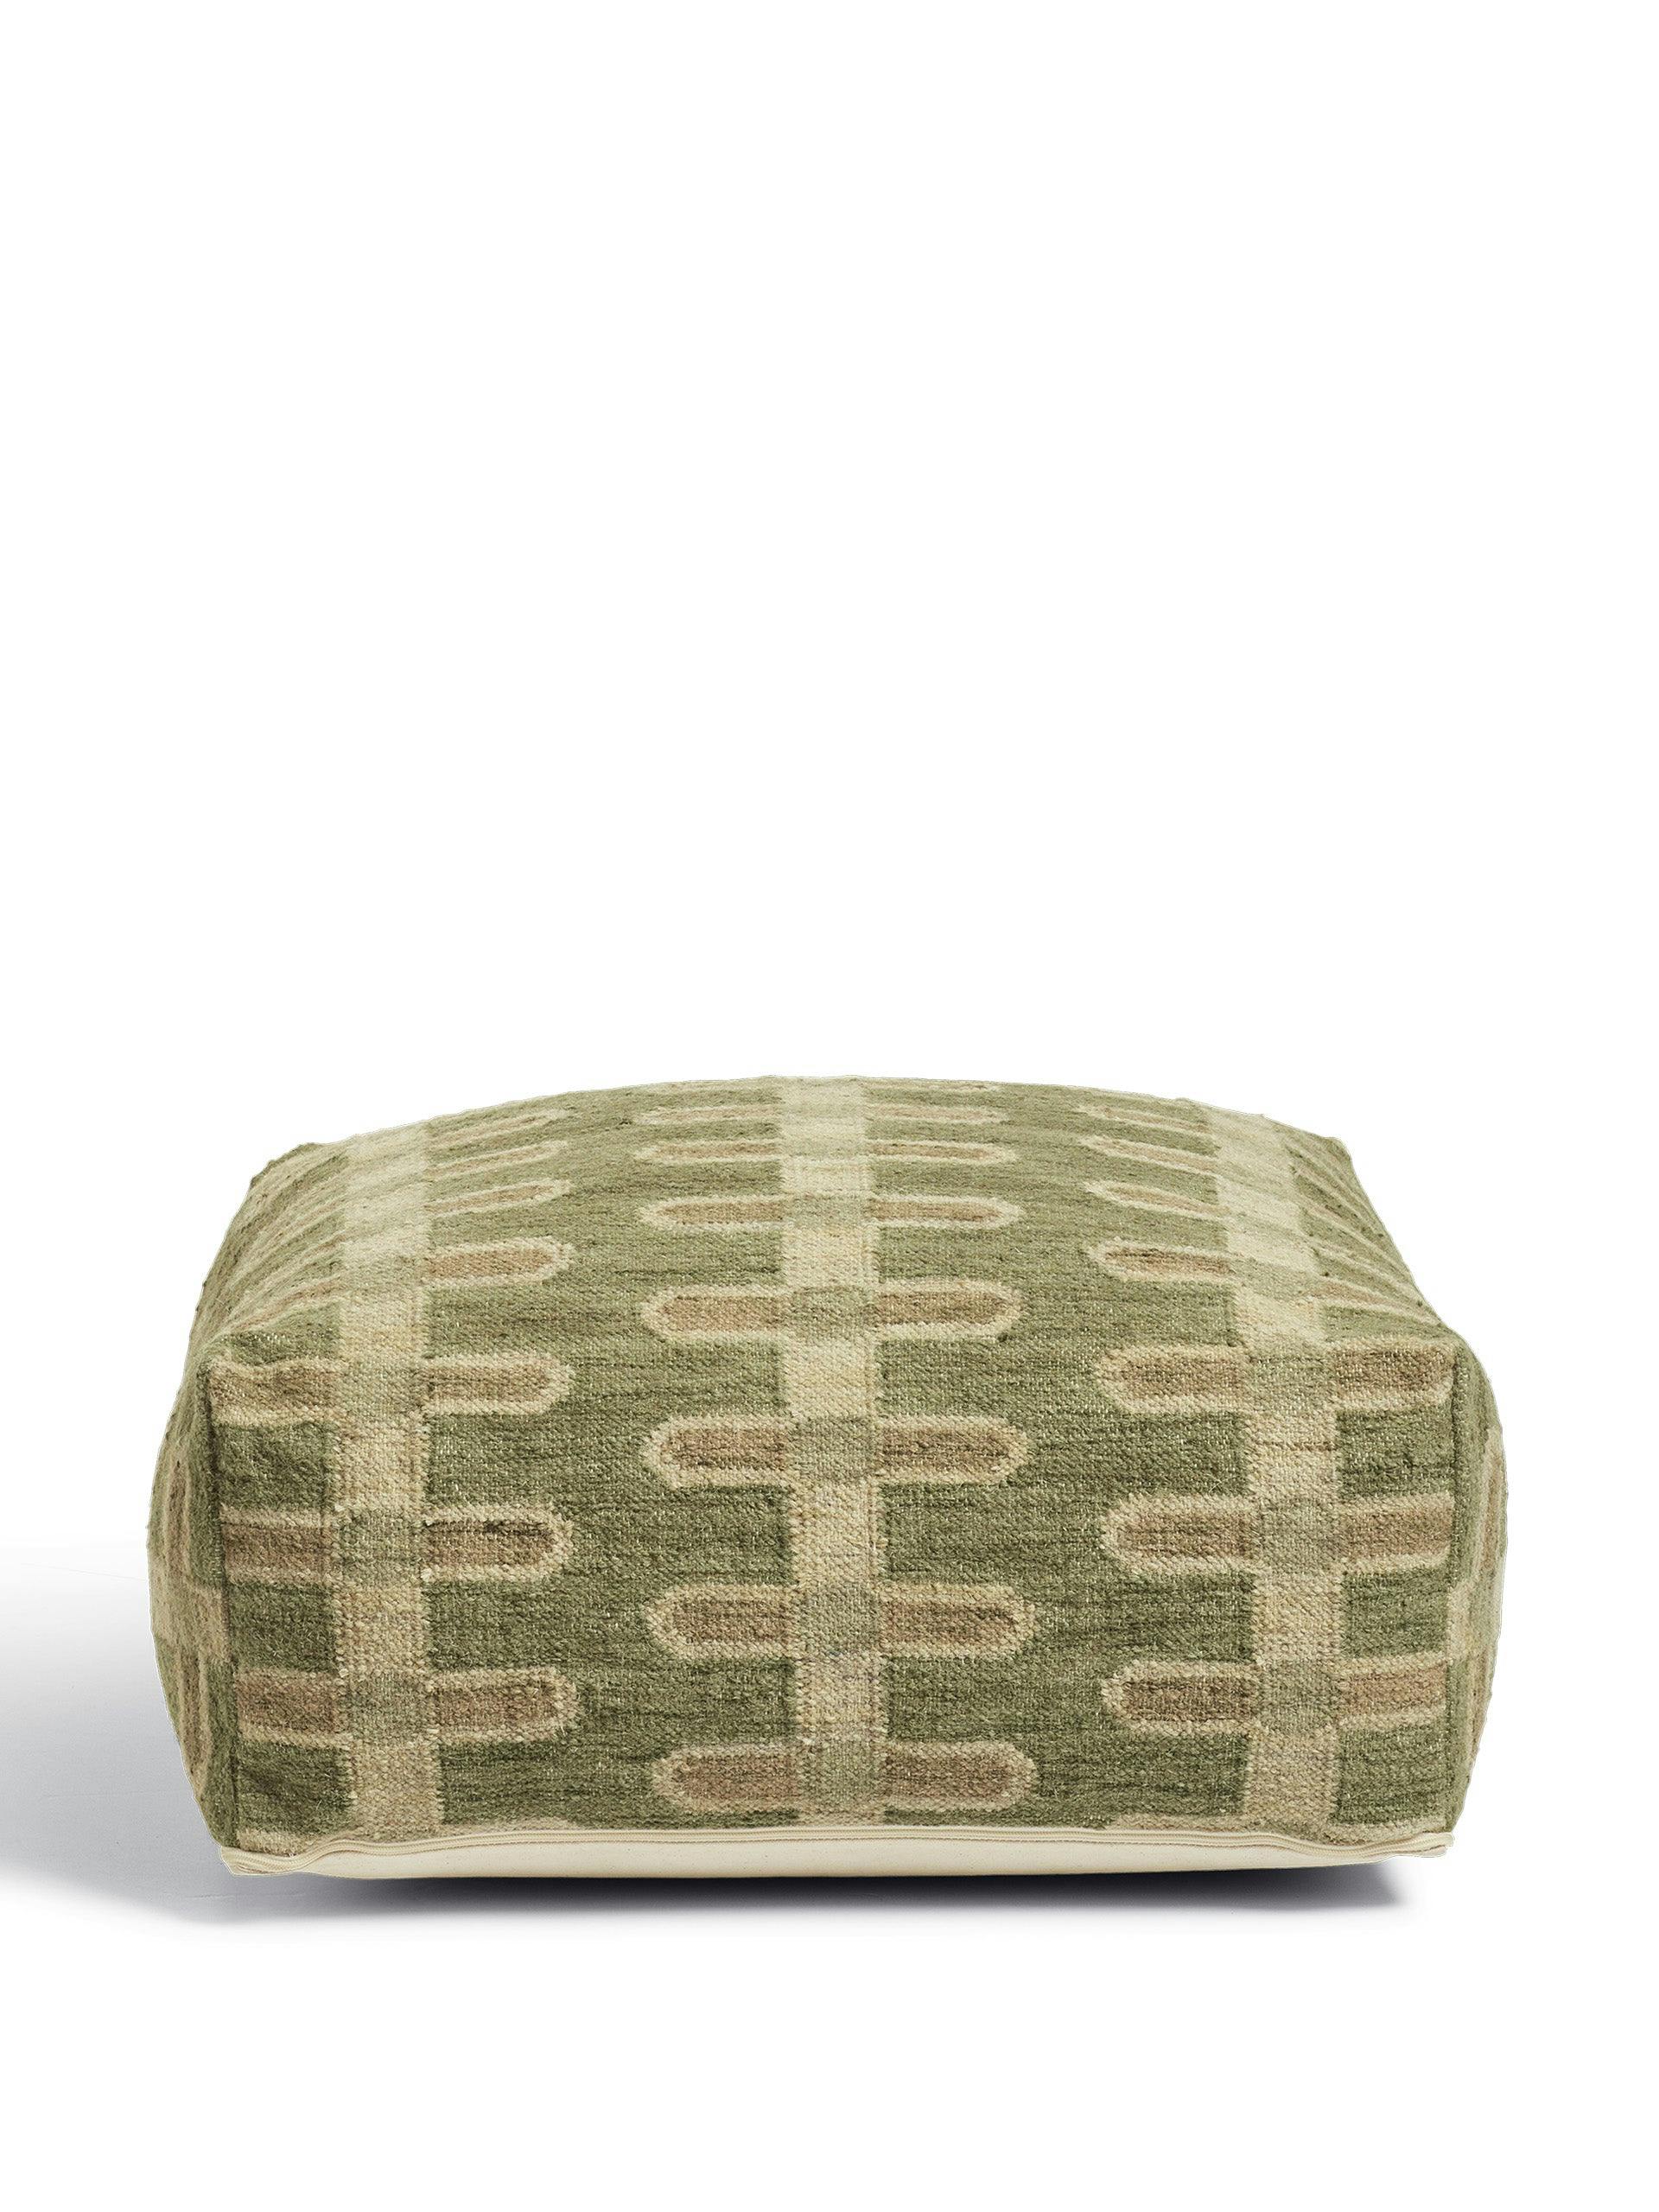 Sycamore green and white floor ottoman